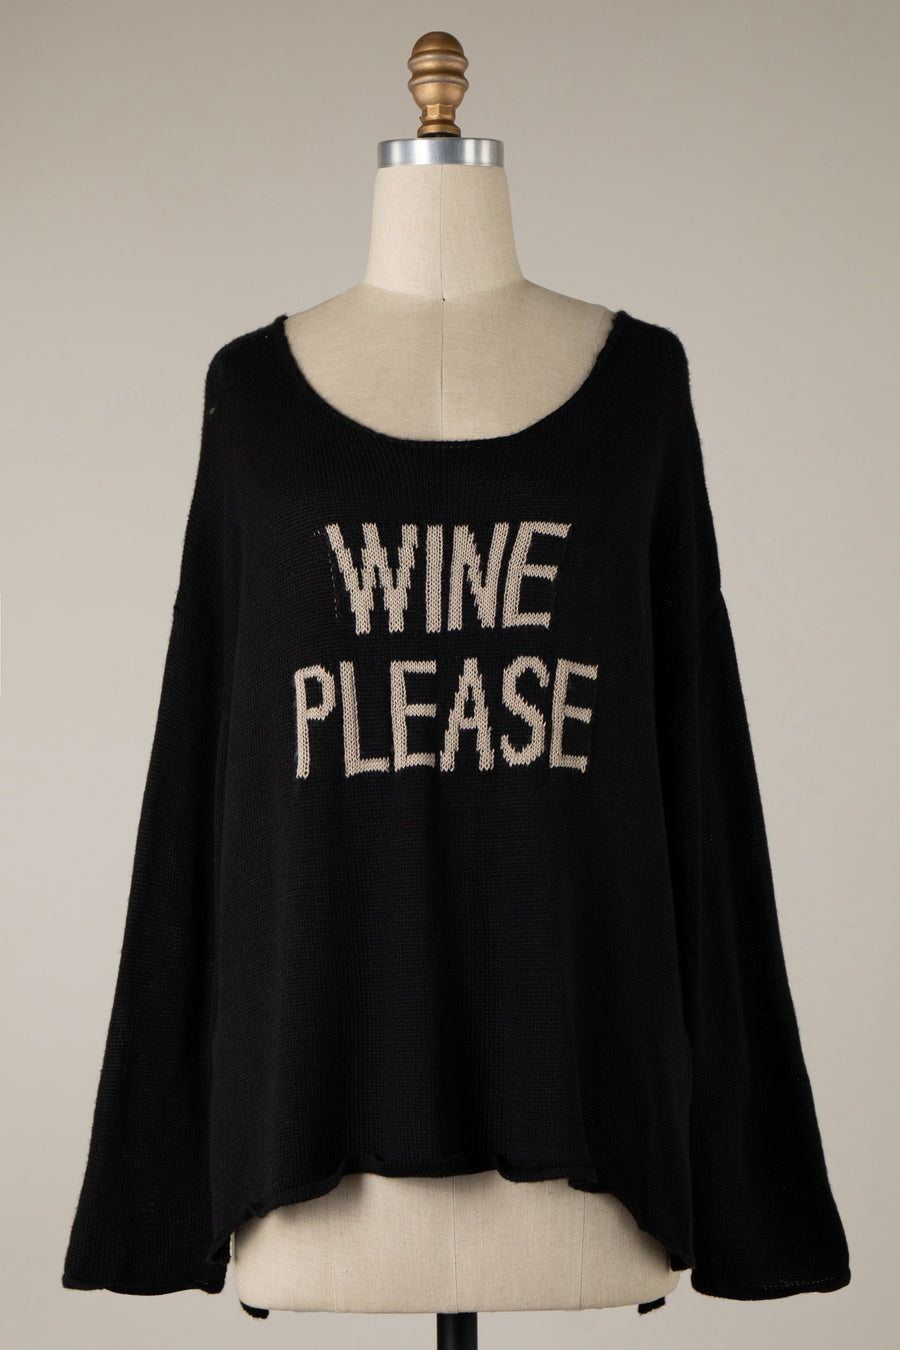 Featuring a ligh weight sweater with the saying "Wine Please" in the front and a wide neckline.